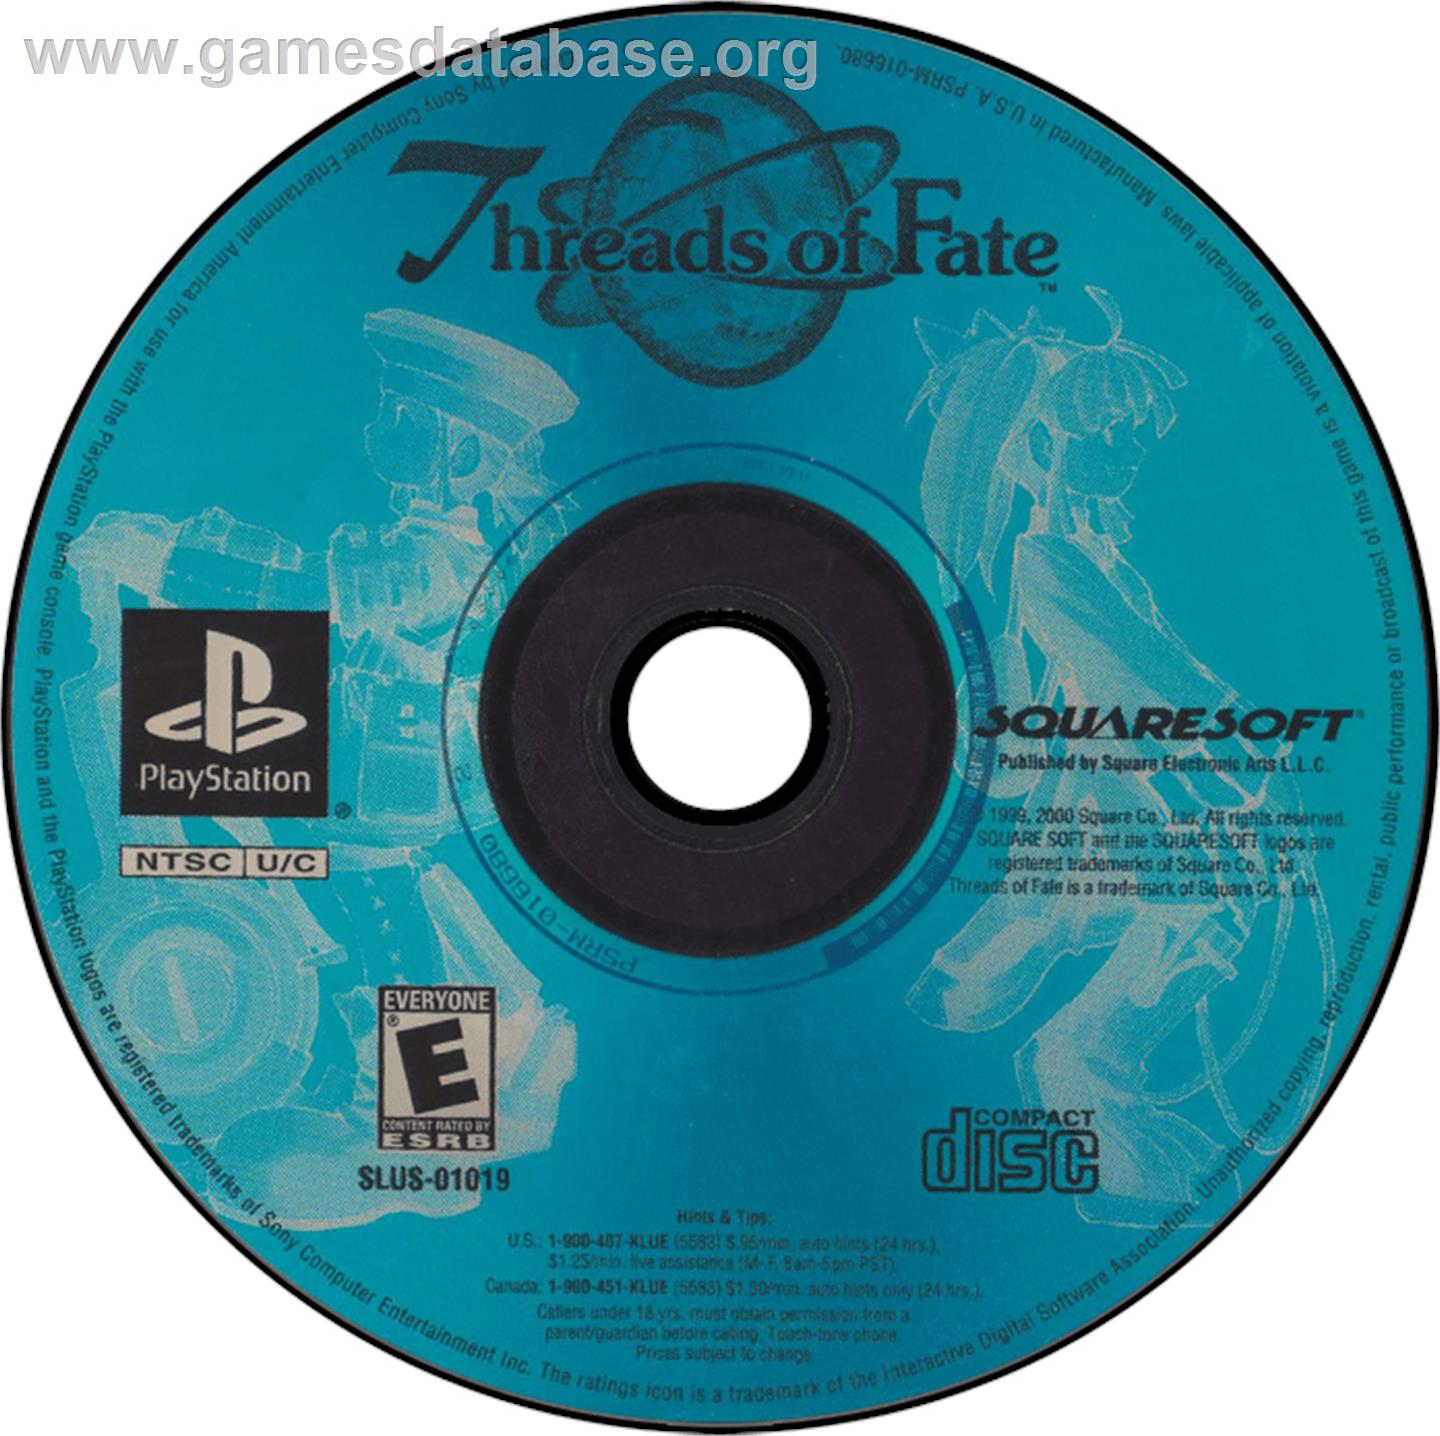 Threads of Fate - Sony Playstation - Artwork - Disc